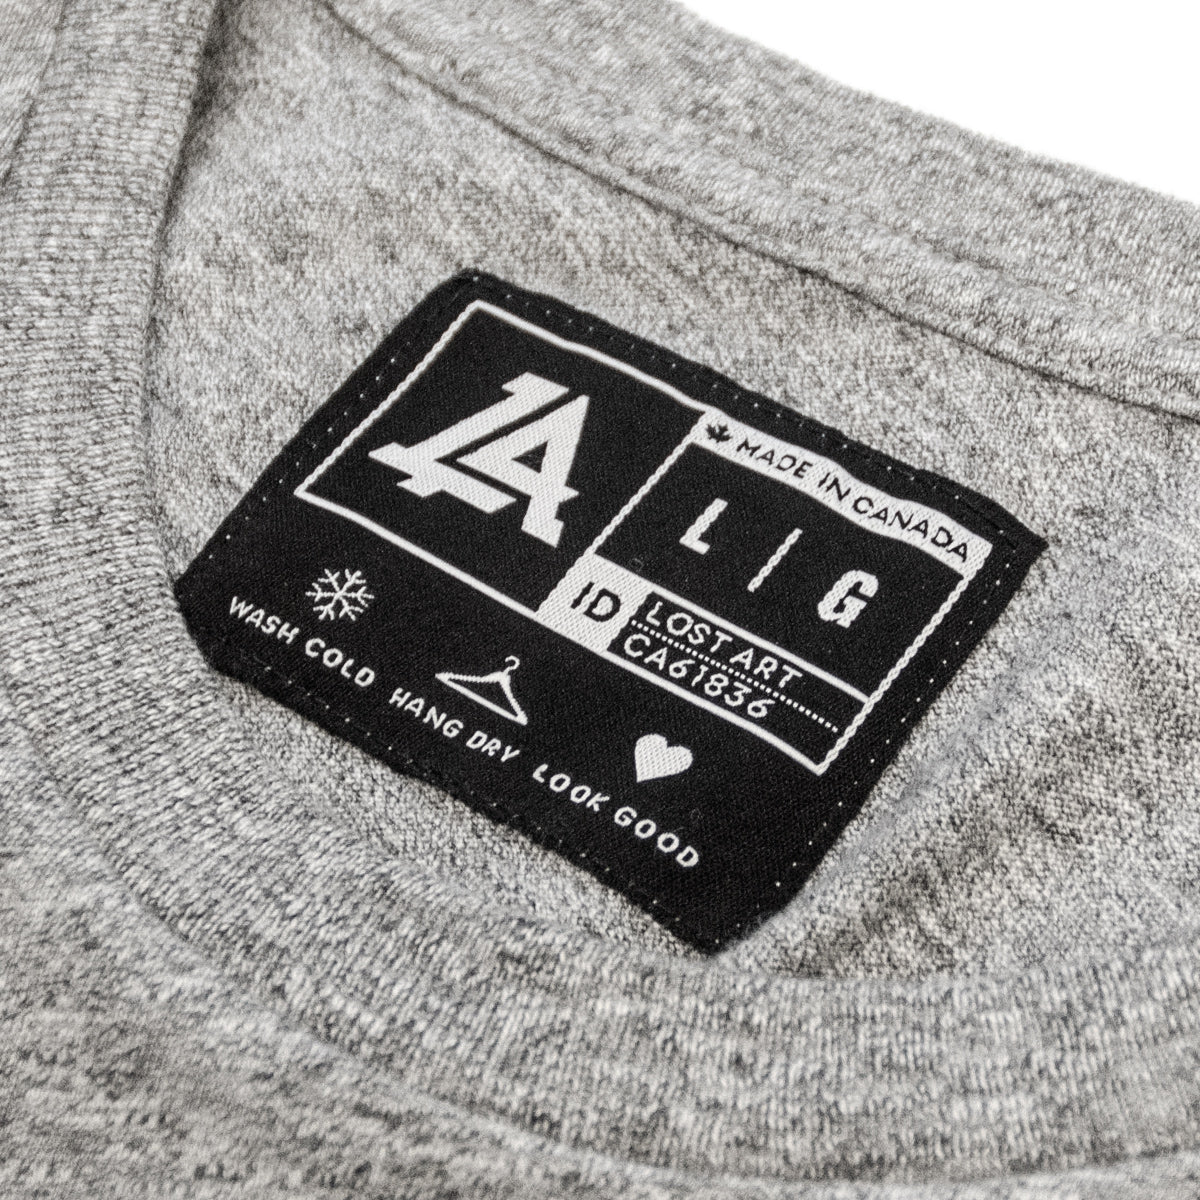 Lost Art Canada - white on grey vintage gridlock tee inside tag view